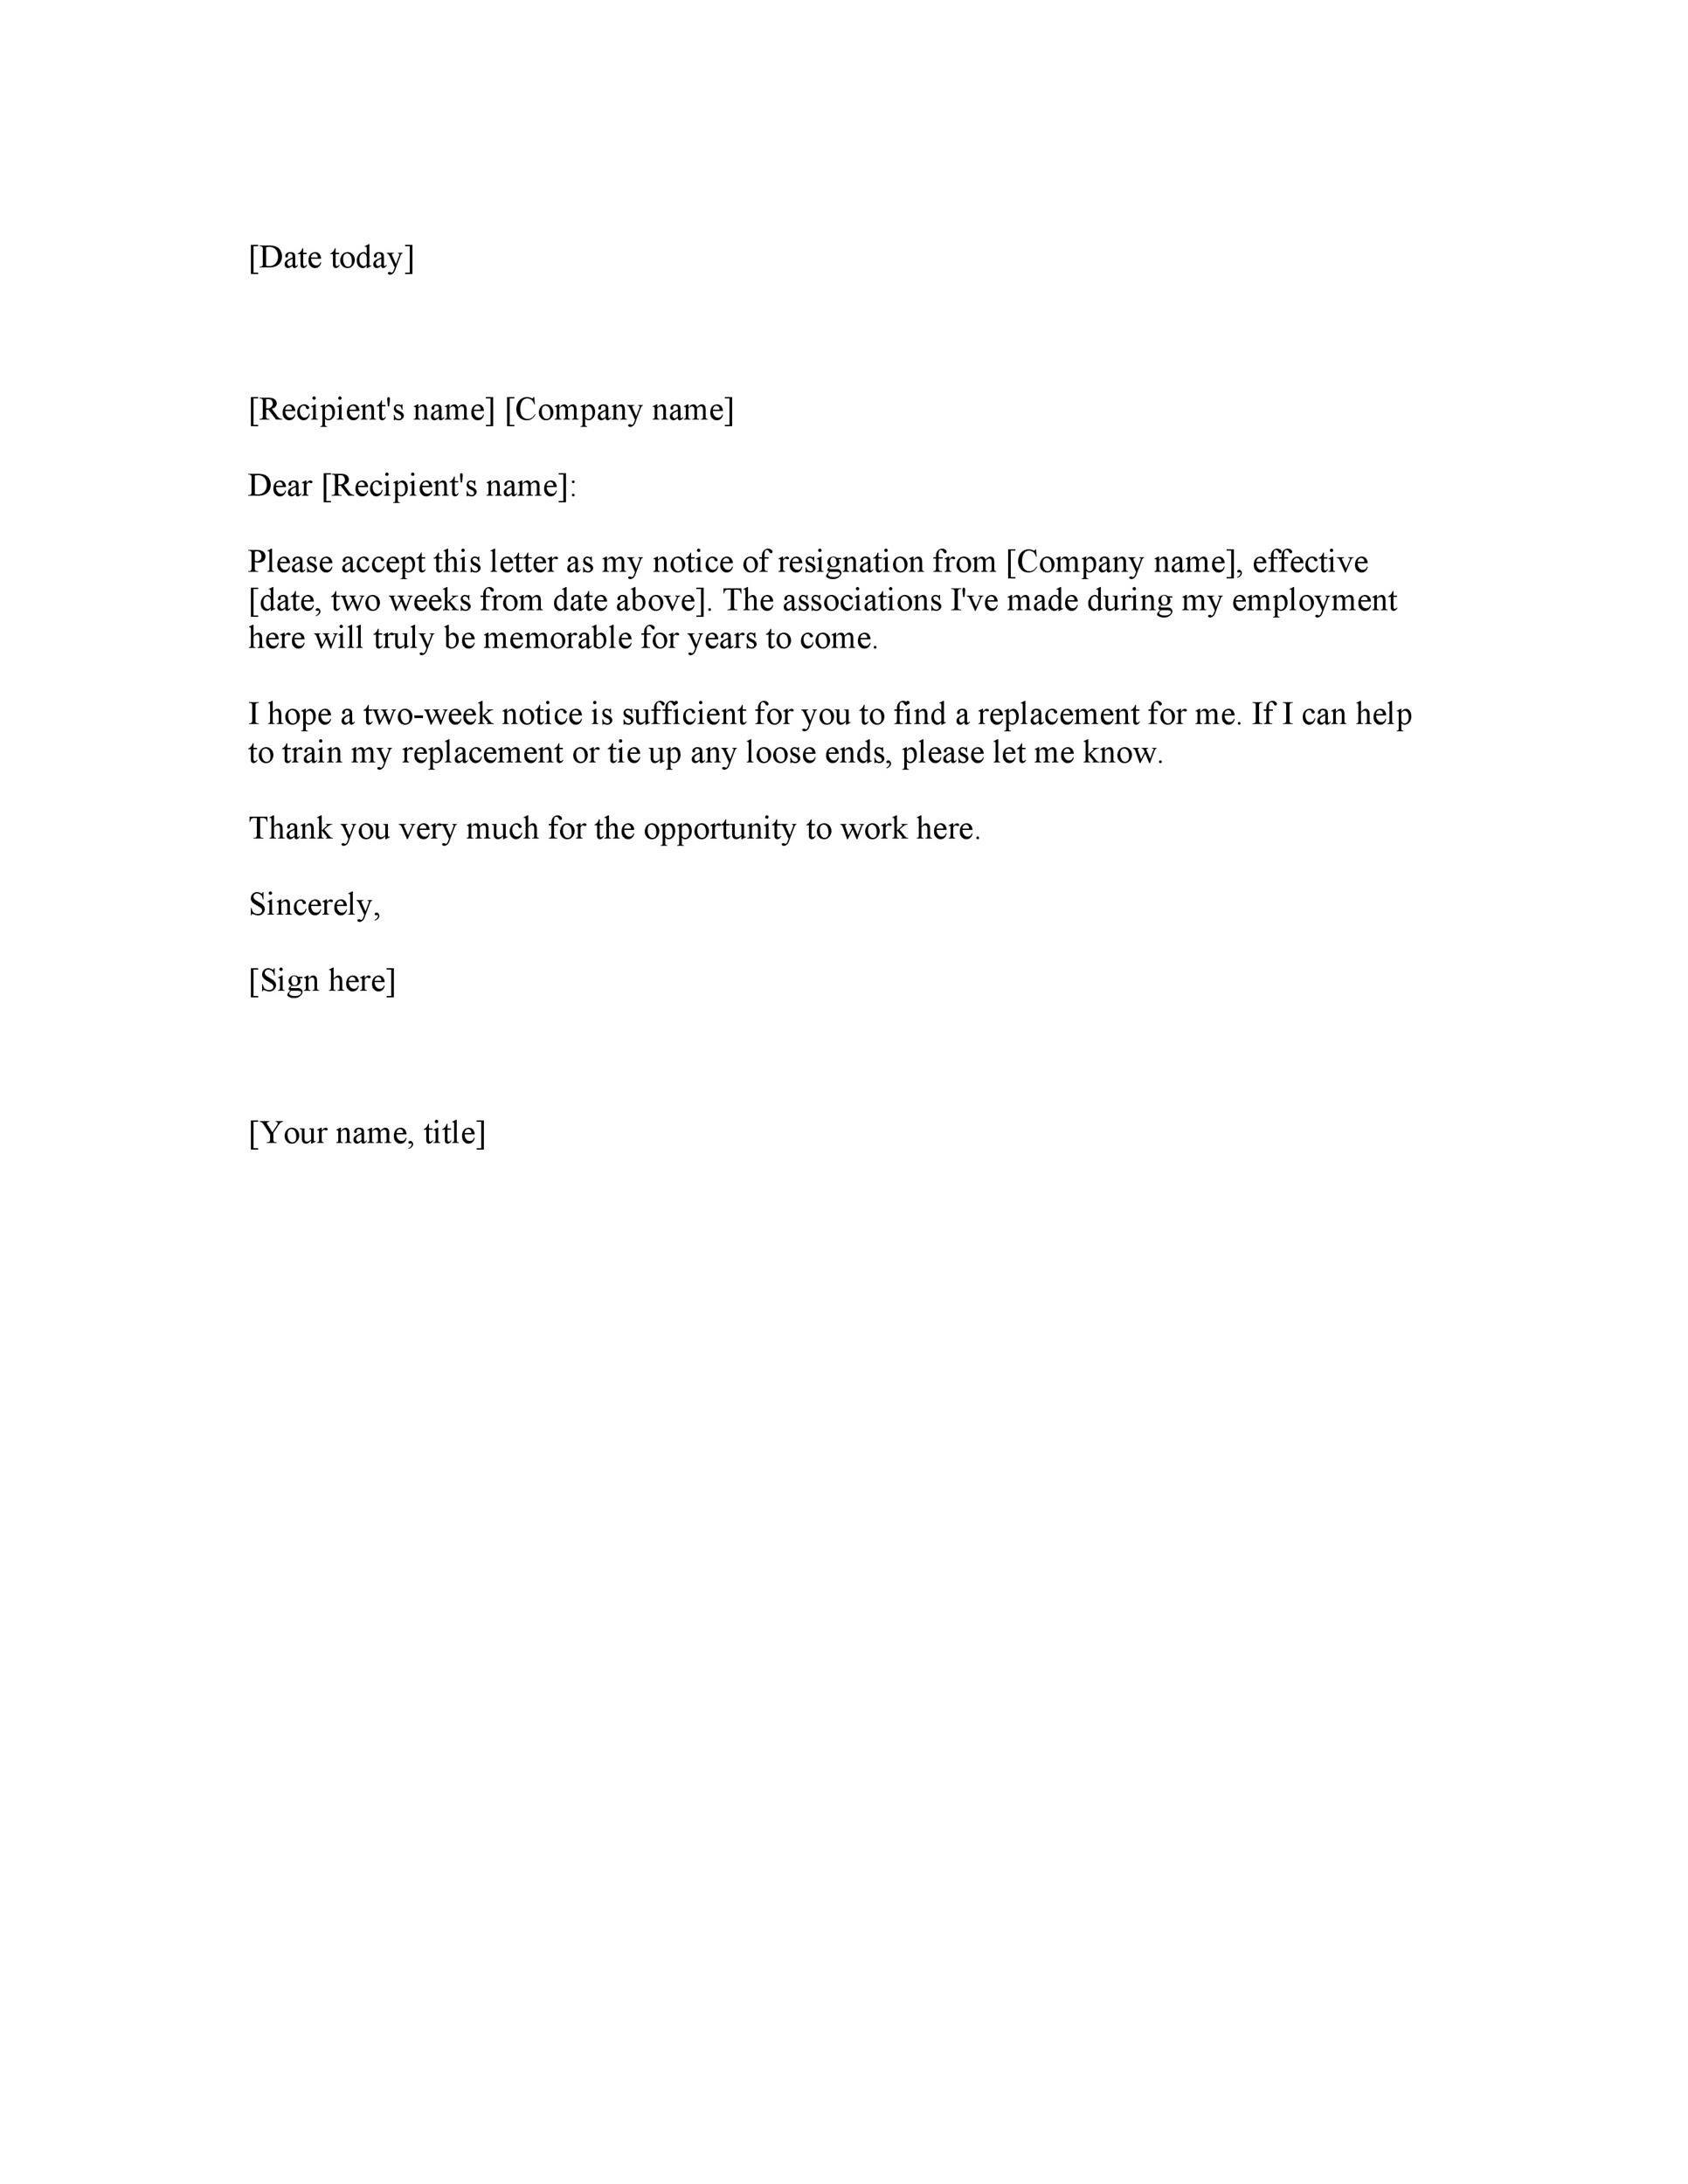 Letter Of Resignation 2 Week Notice from templatelab.com